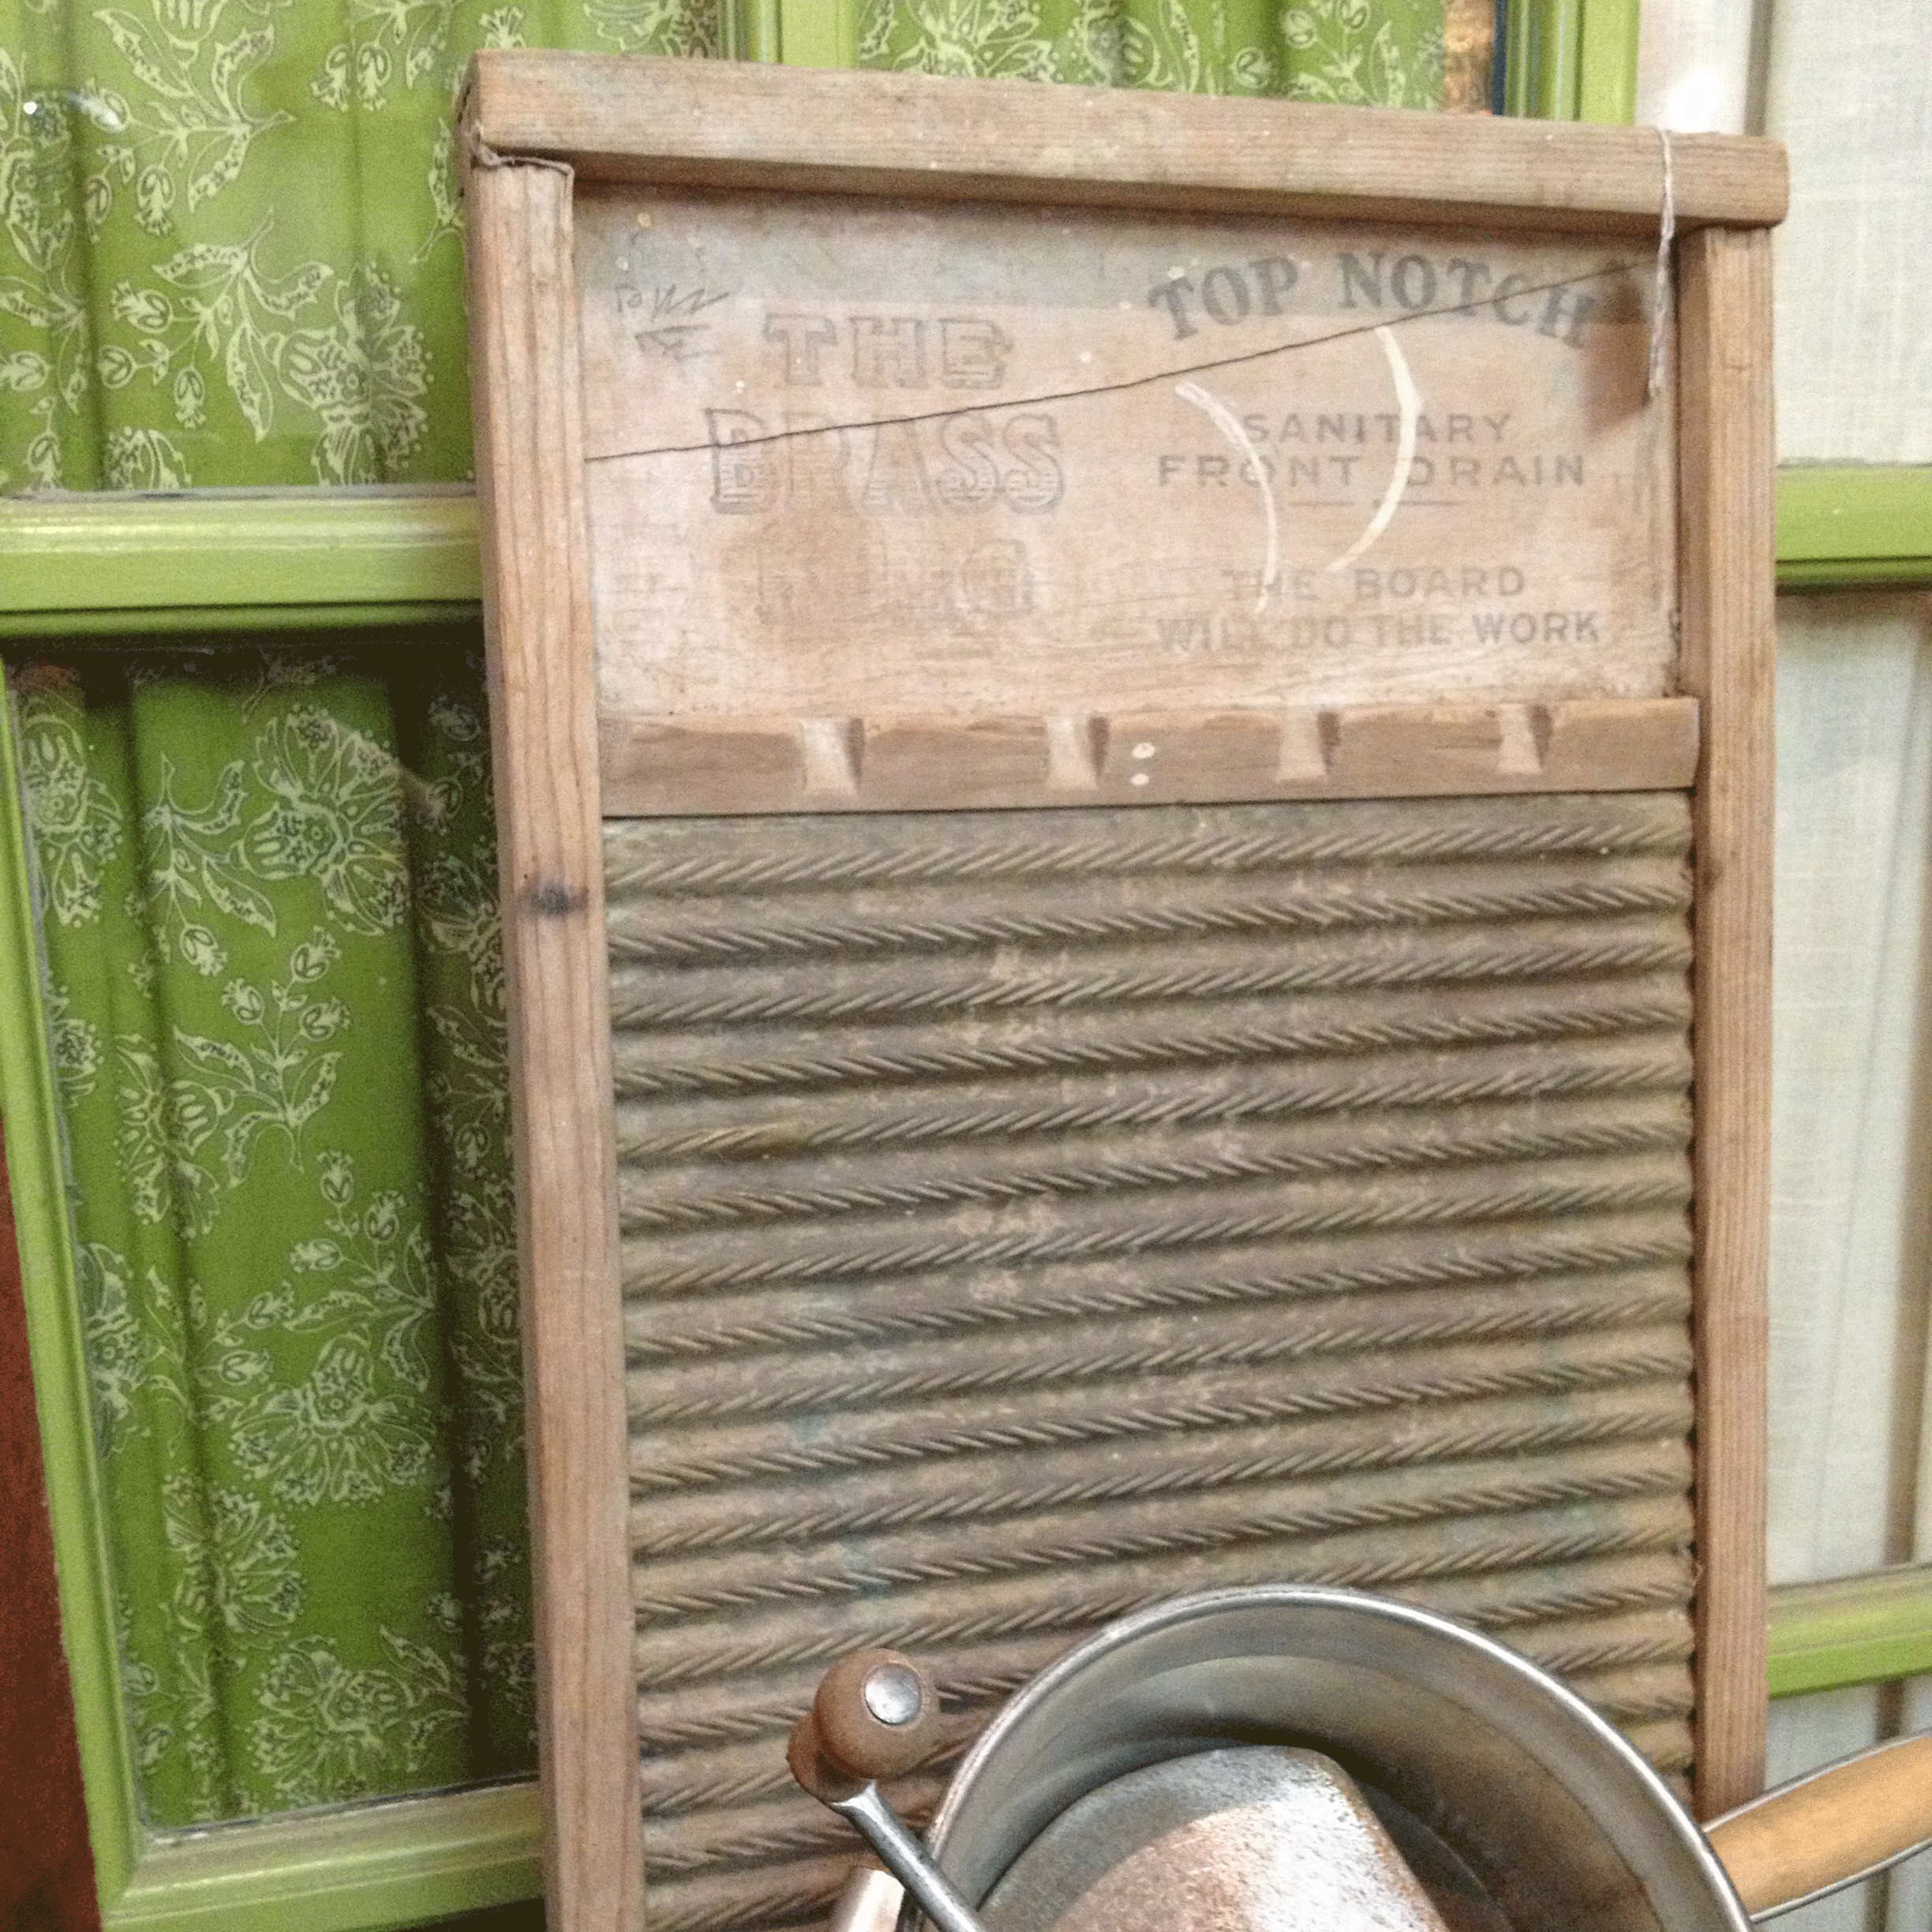 Your clothes will stay sparkly clean while you glamp thanks to this vintage washboard.